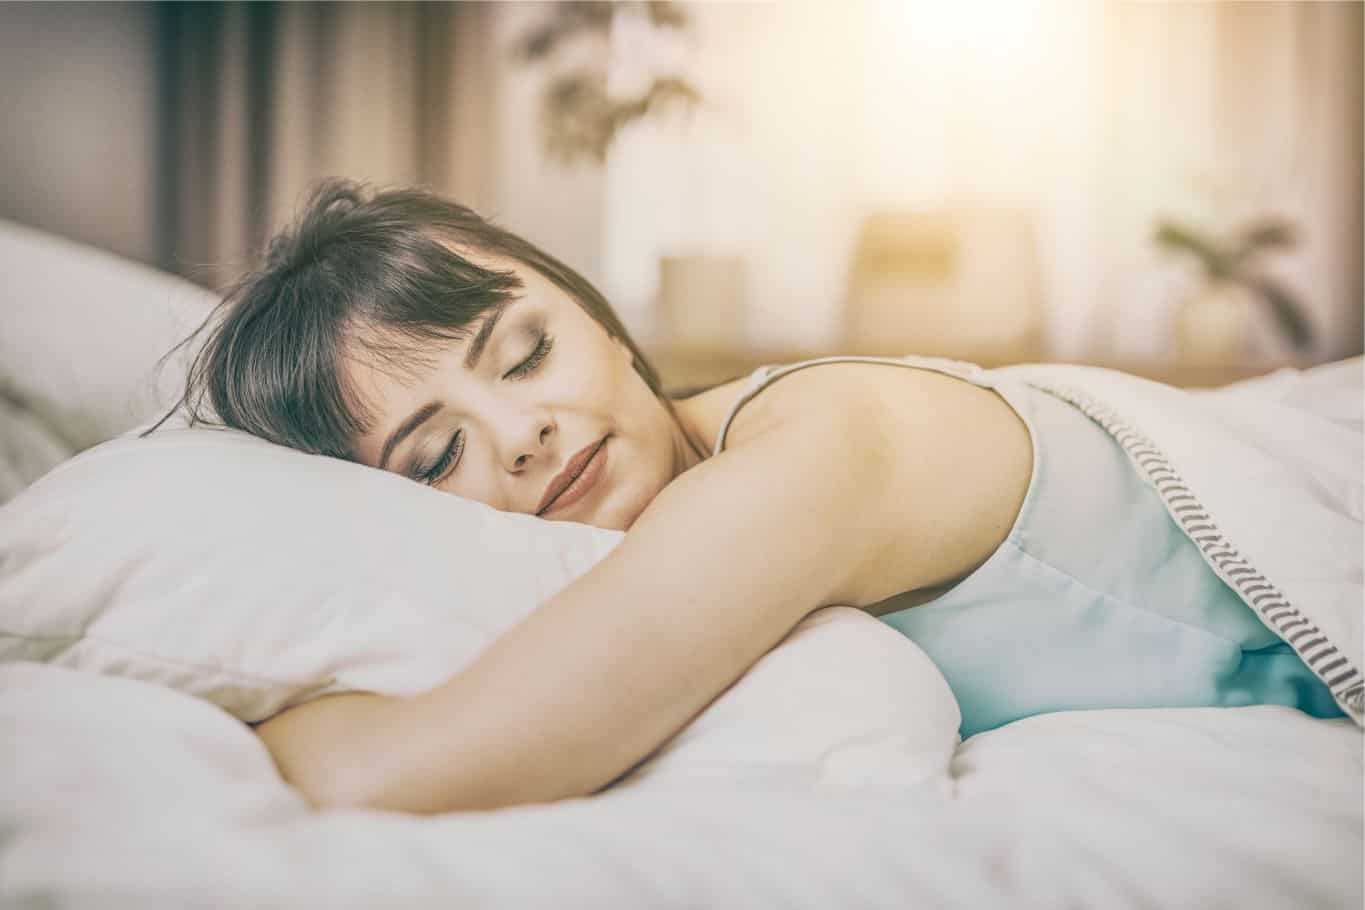 Sweet Dreams - Getting a good night's sleep is a priority at our detox center in Florida